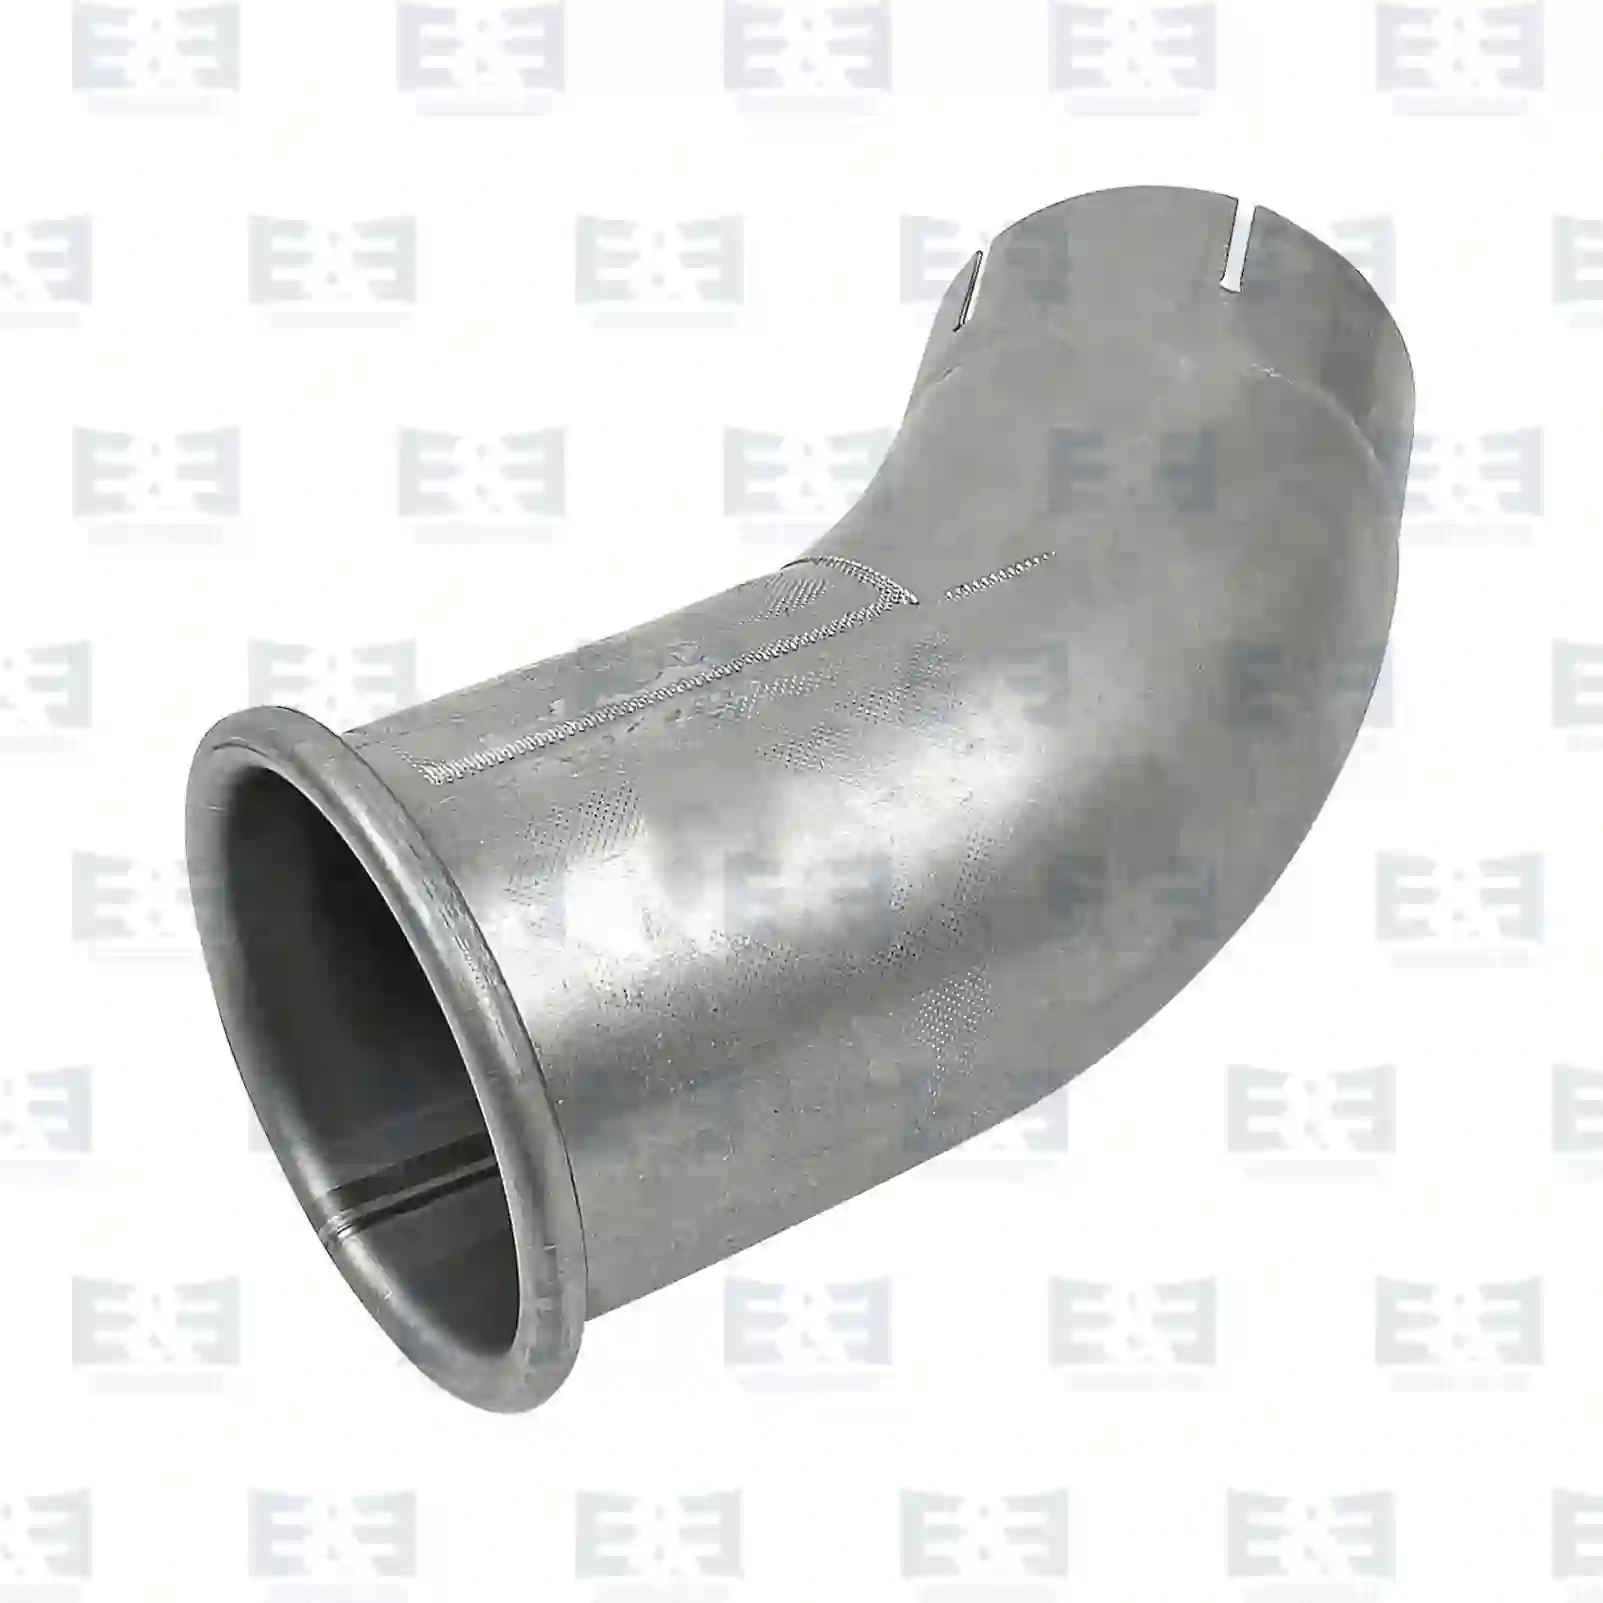 Exhaust pipe, without heat protection pipe, 2E2204468, 5010389467 ||  2E2204468 E&E Truck Spare Parts | Truck Spare Parts, Auotomotive Spare Parts Exhaust pipe, without heat protection pipe, 2E2204468, 5010389467 ||  2E2204468 E&E Truck Spare Parts | Truck Spare Parts, Auotomotive Spare Parts